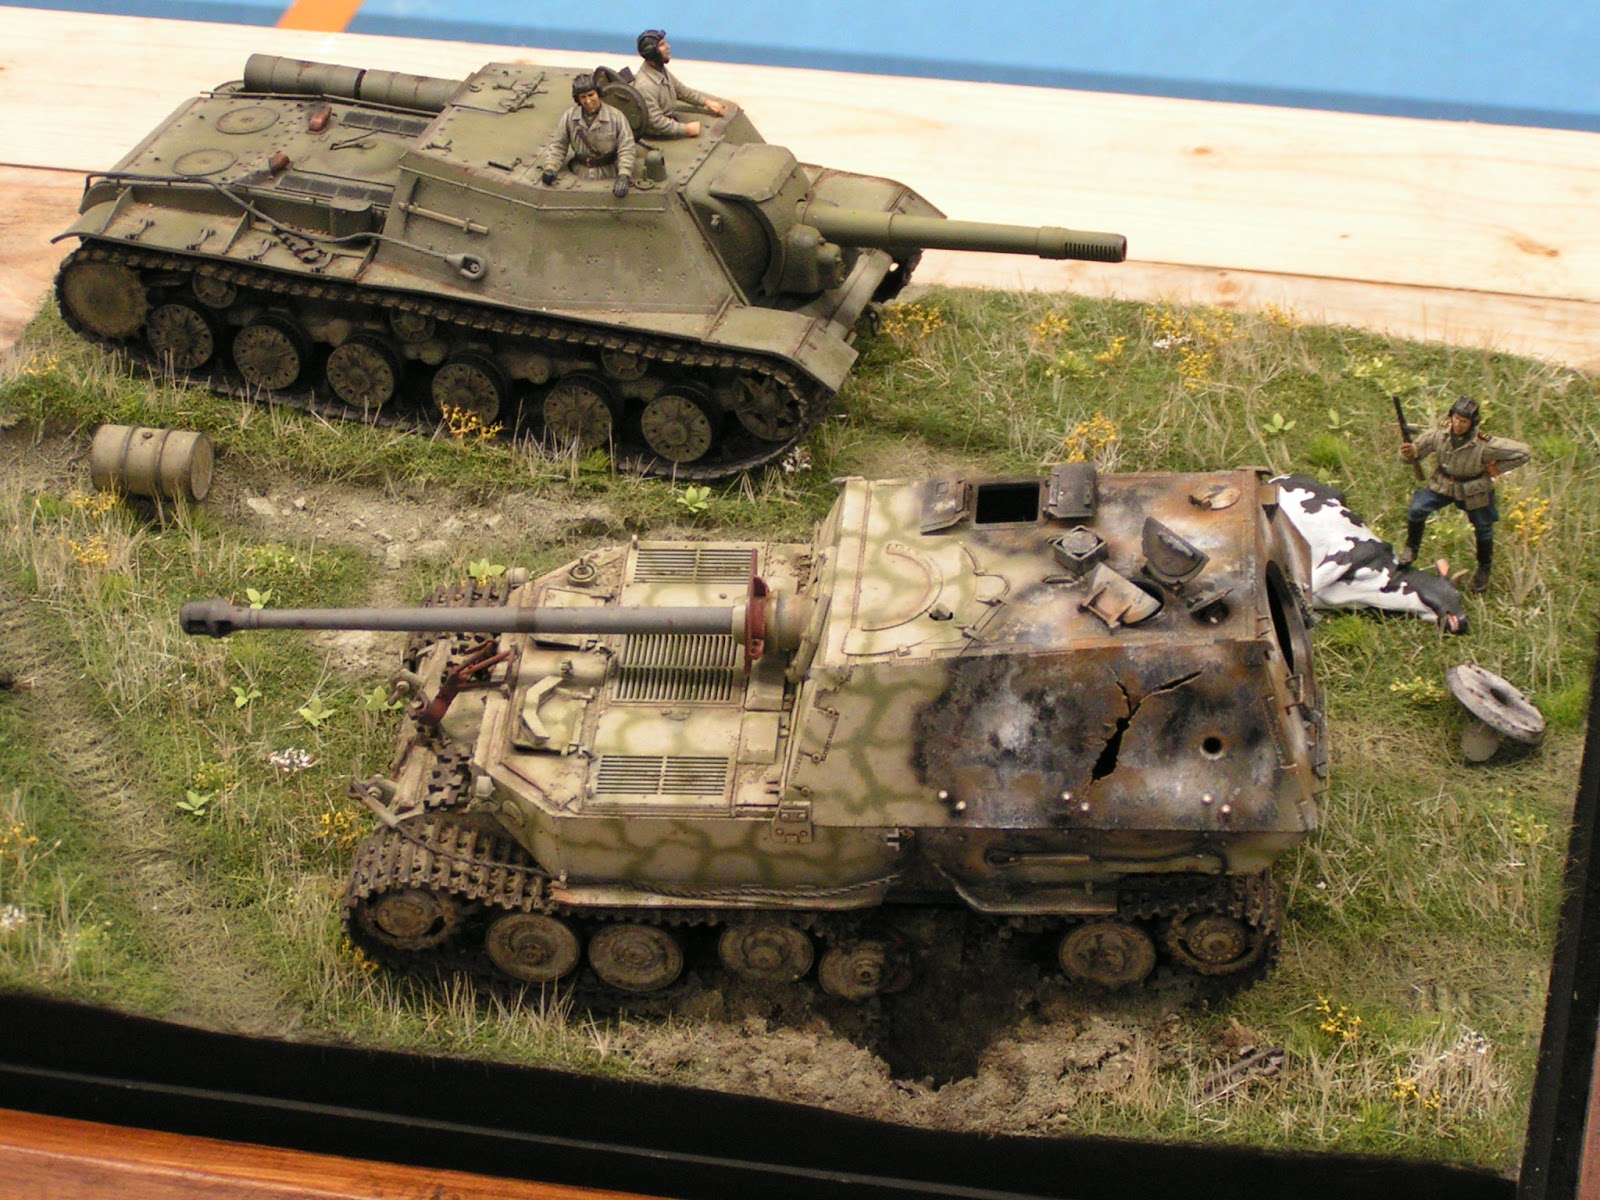 Dampf's modelling page: West Midlands Military Show, Alumwell